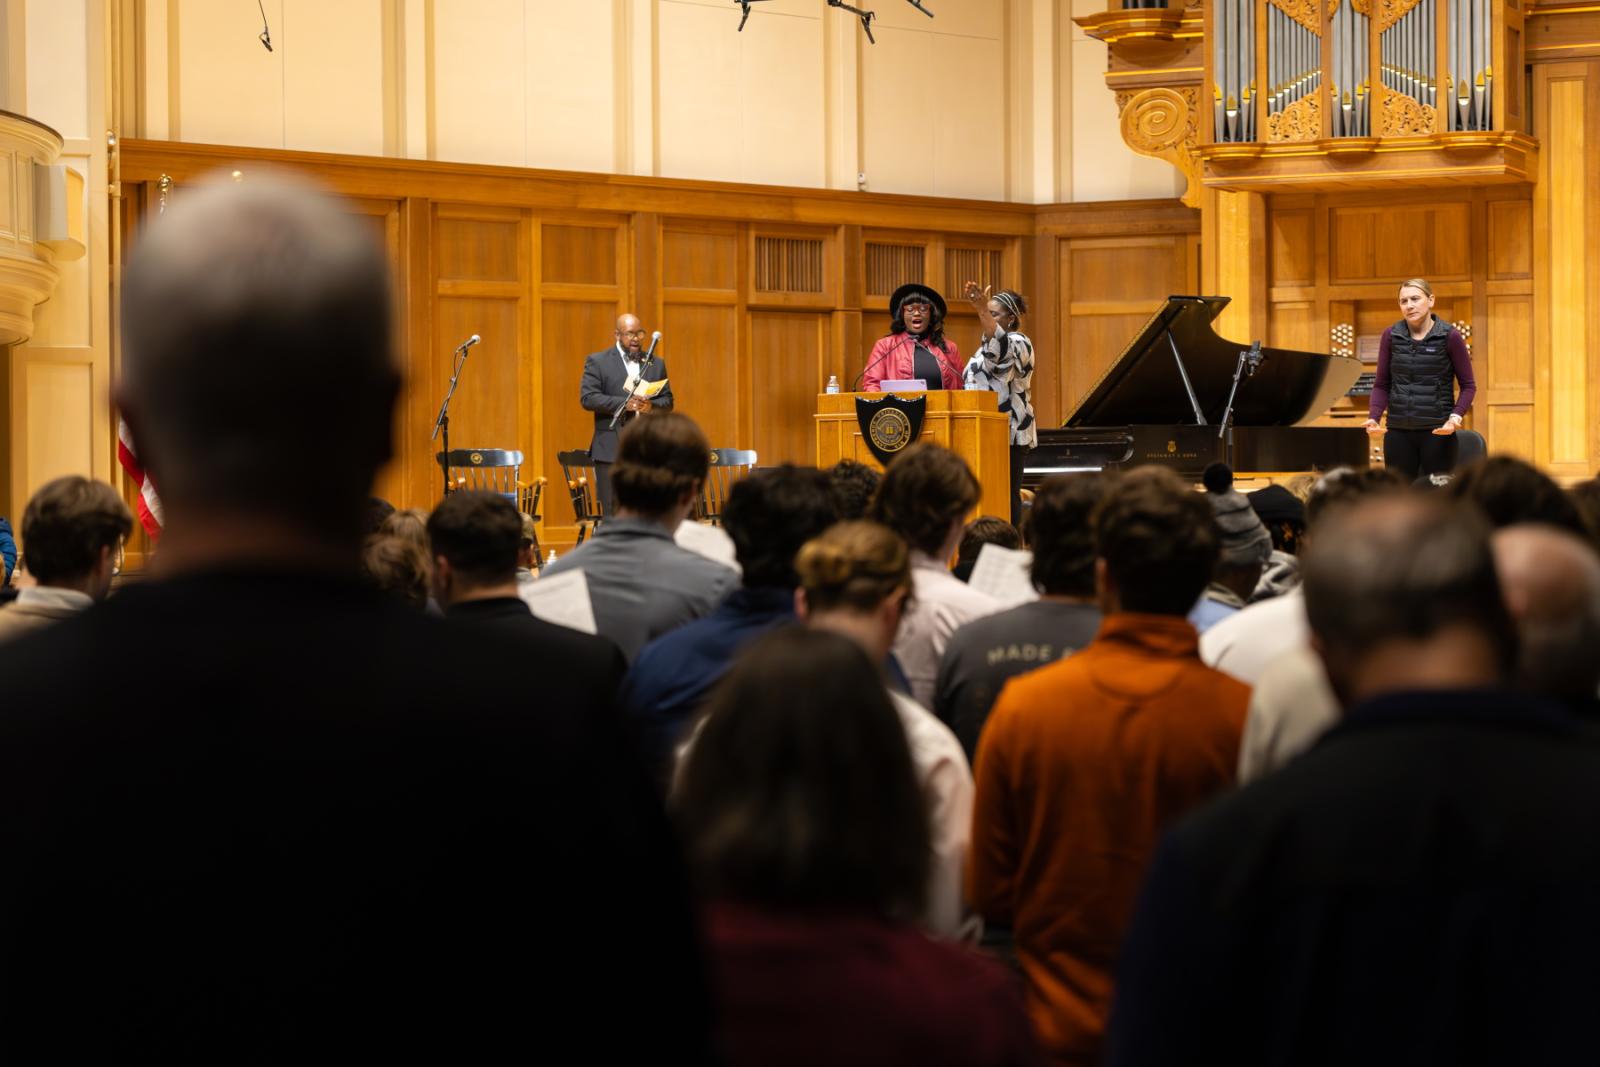 Attendees sing Lift Every Voice and Sing during the Jan. 15 MLK Celebration in Memorial Chapel.